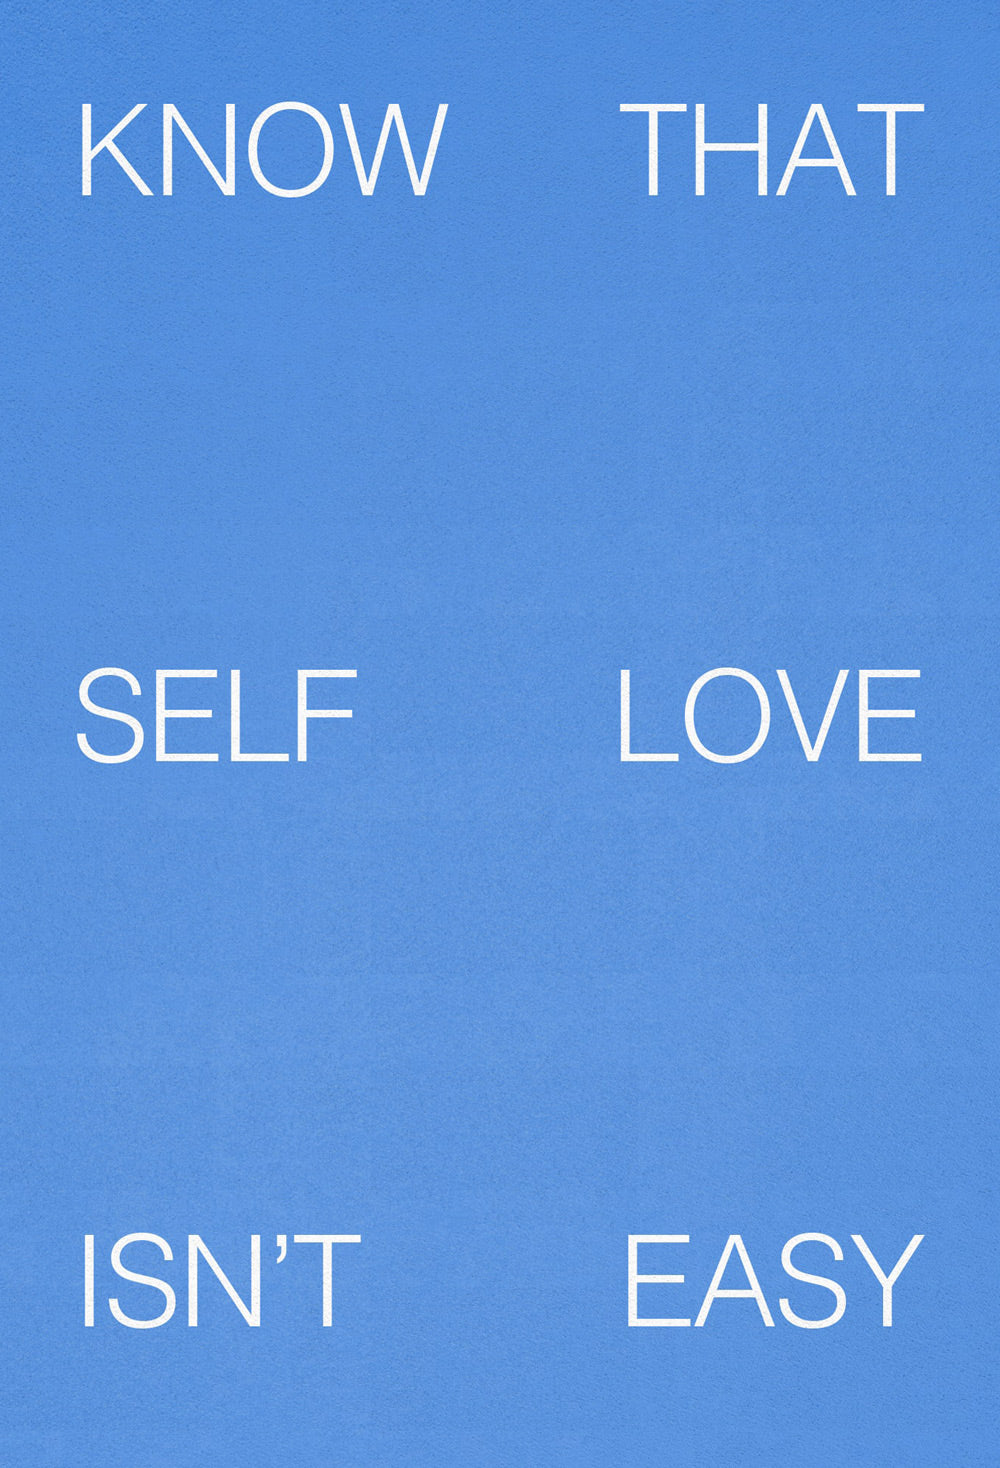 How To (Really) Love Yourself <br> by Self Space